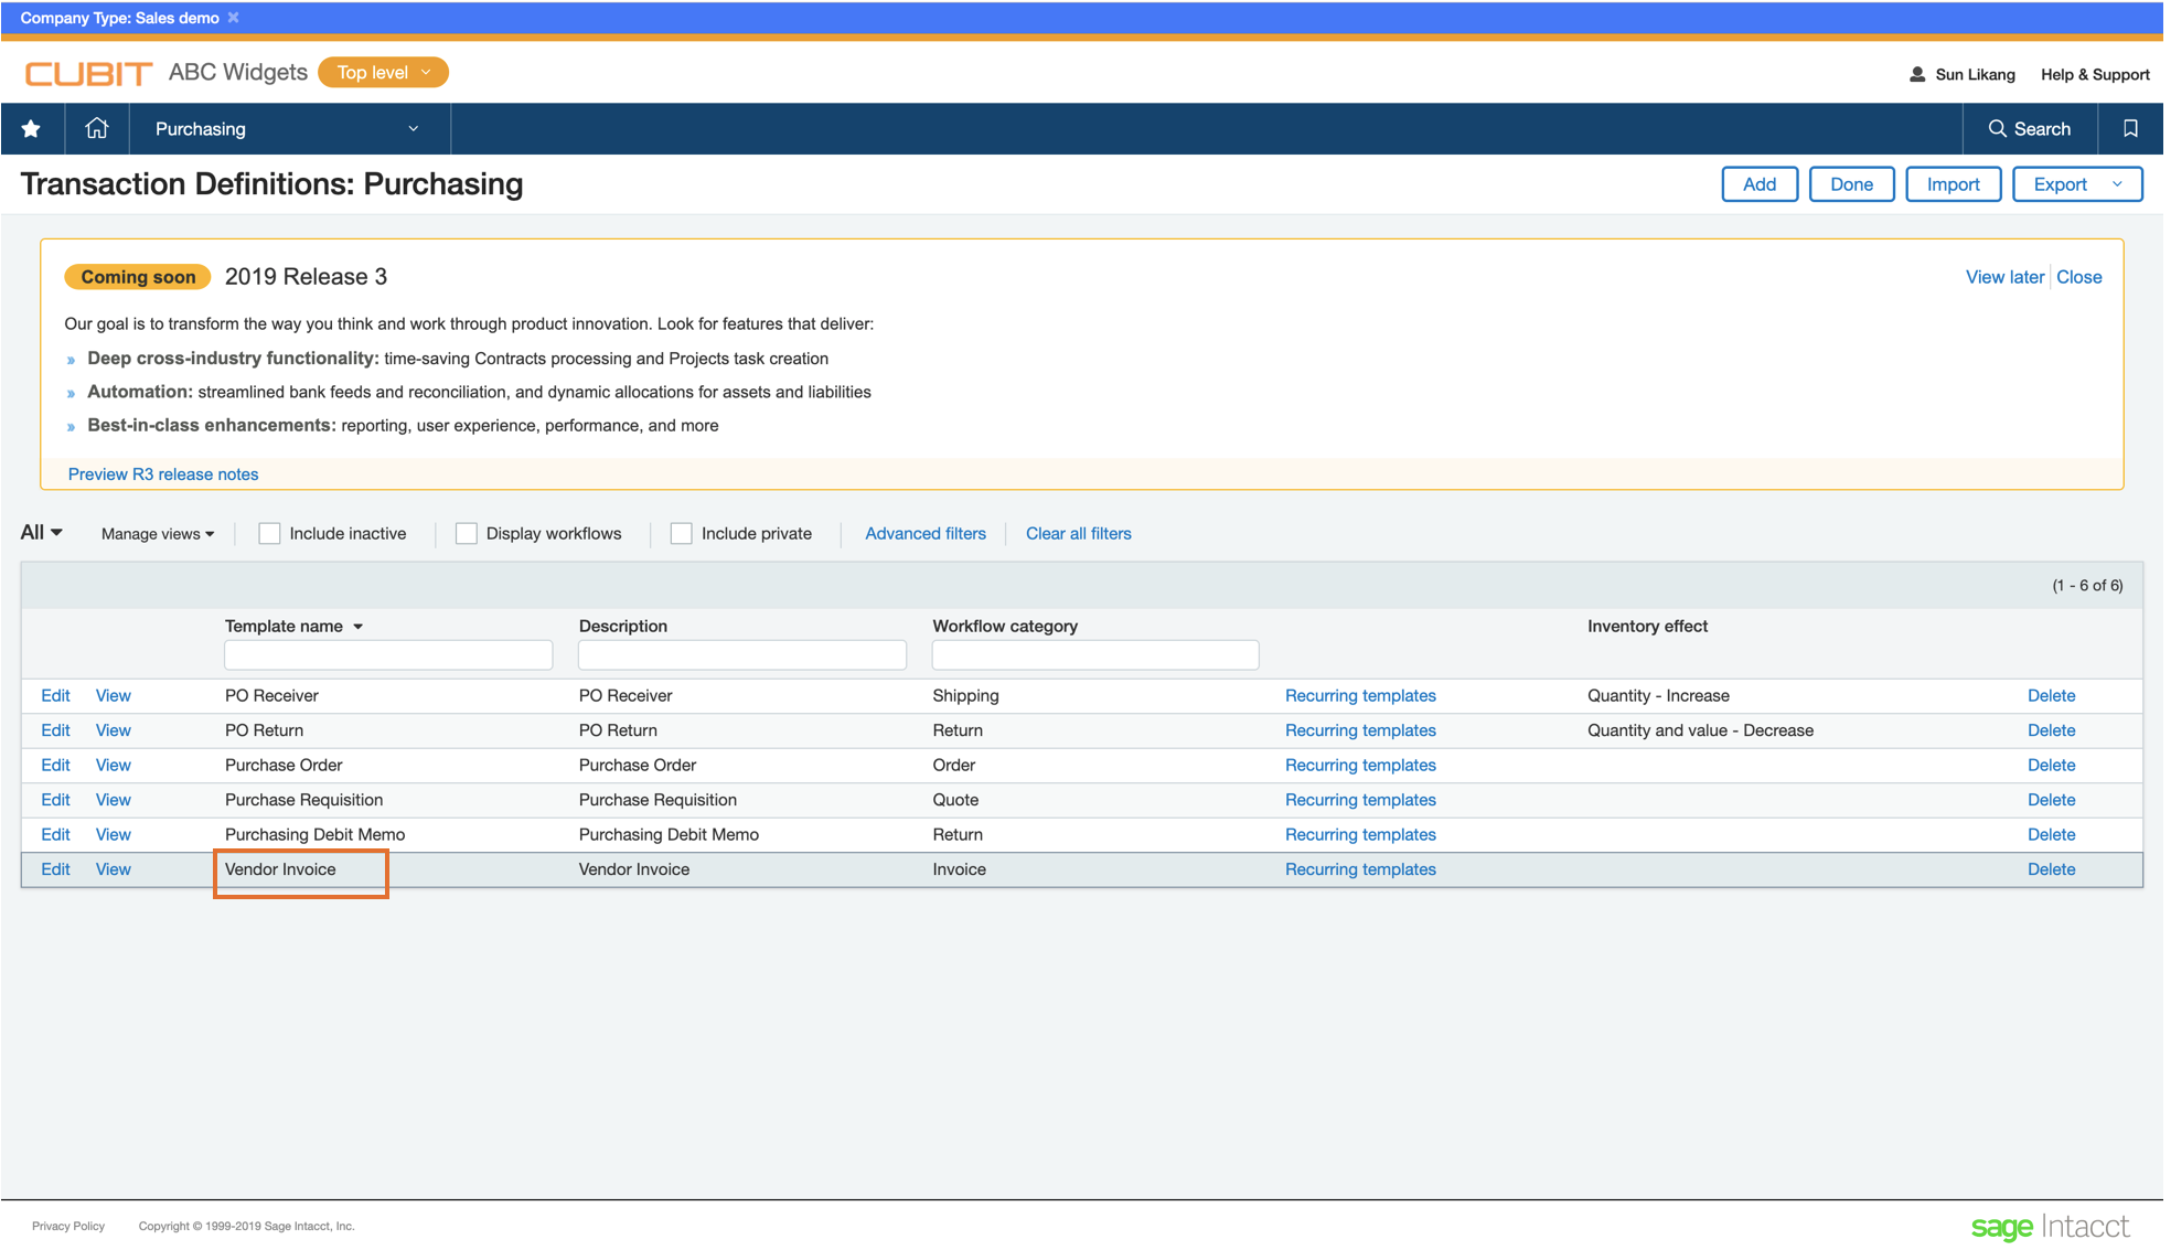 Transaction Definitions page in Intacct - VI